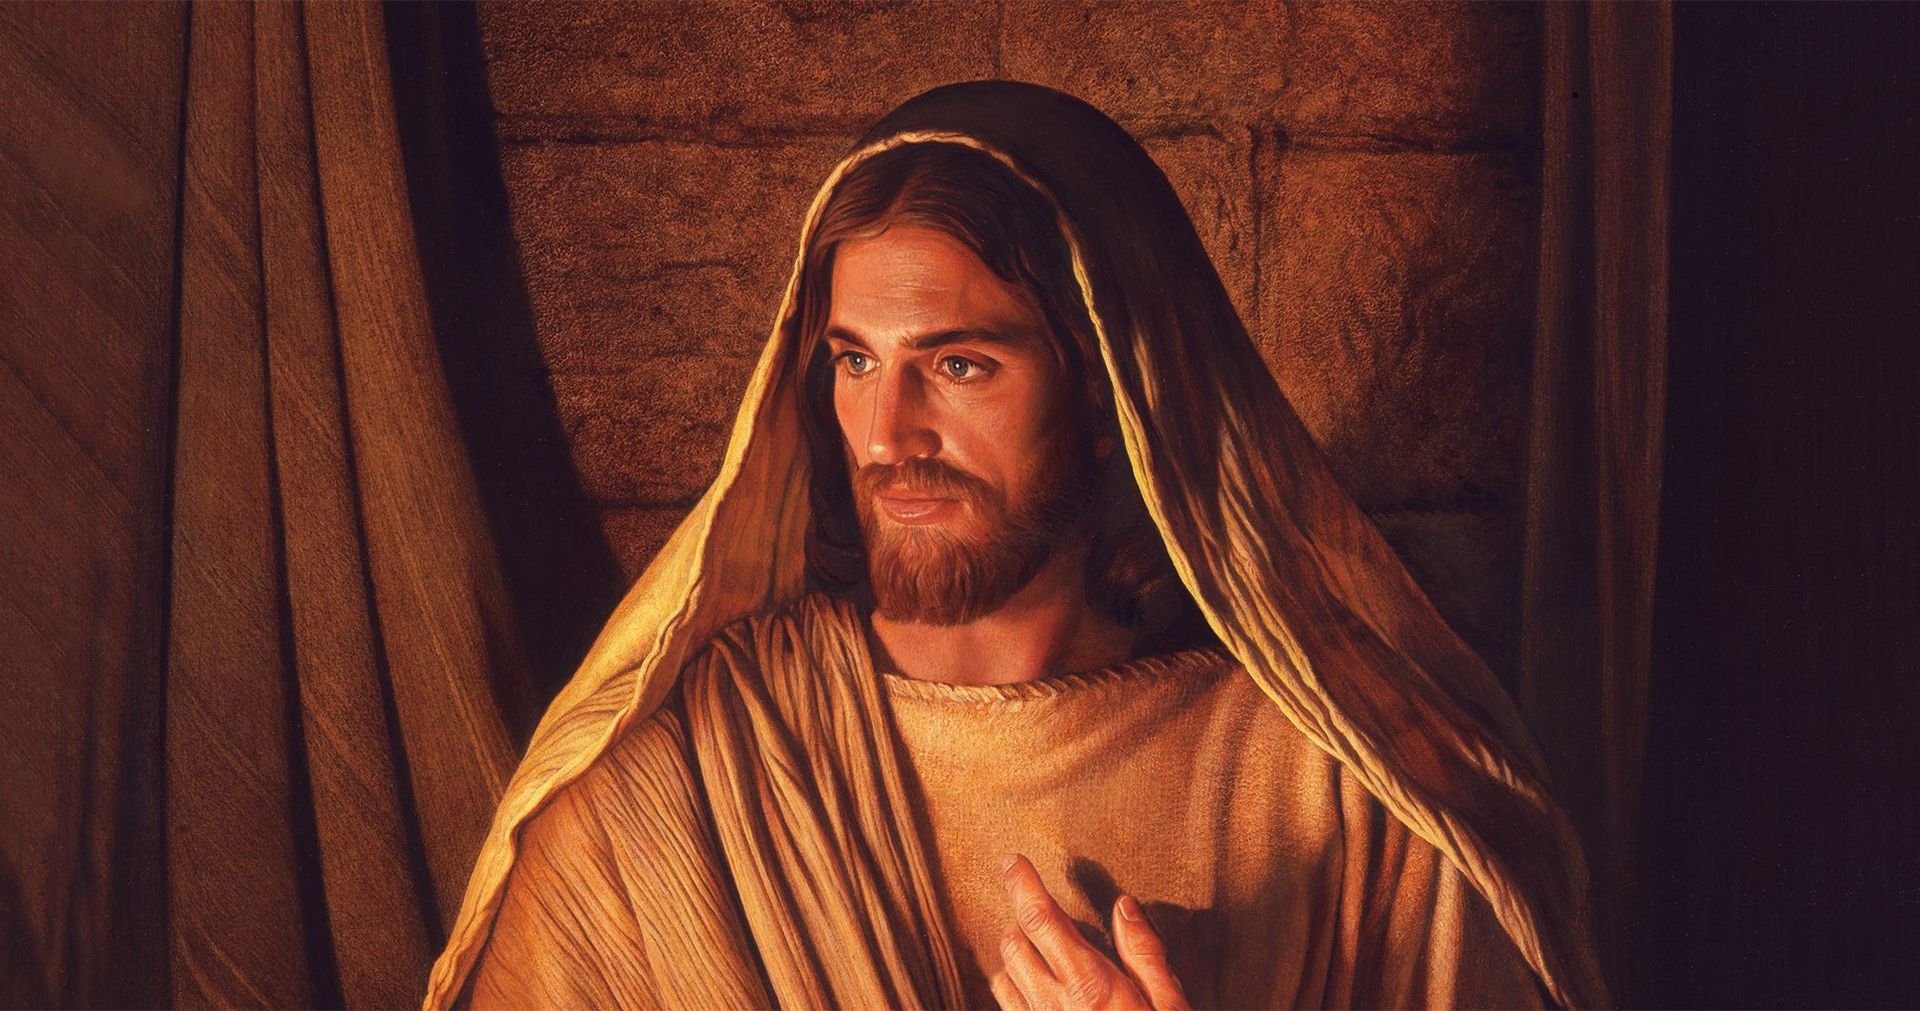 Jesus Christ points to Himself while seated in a warmly lit room.